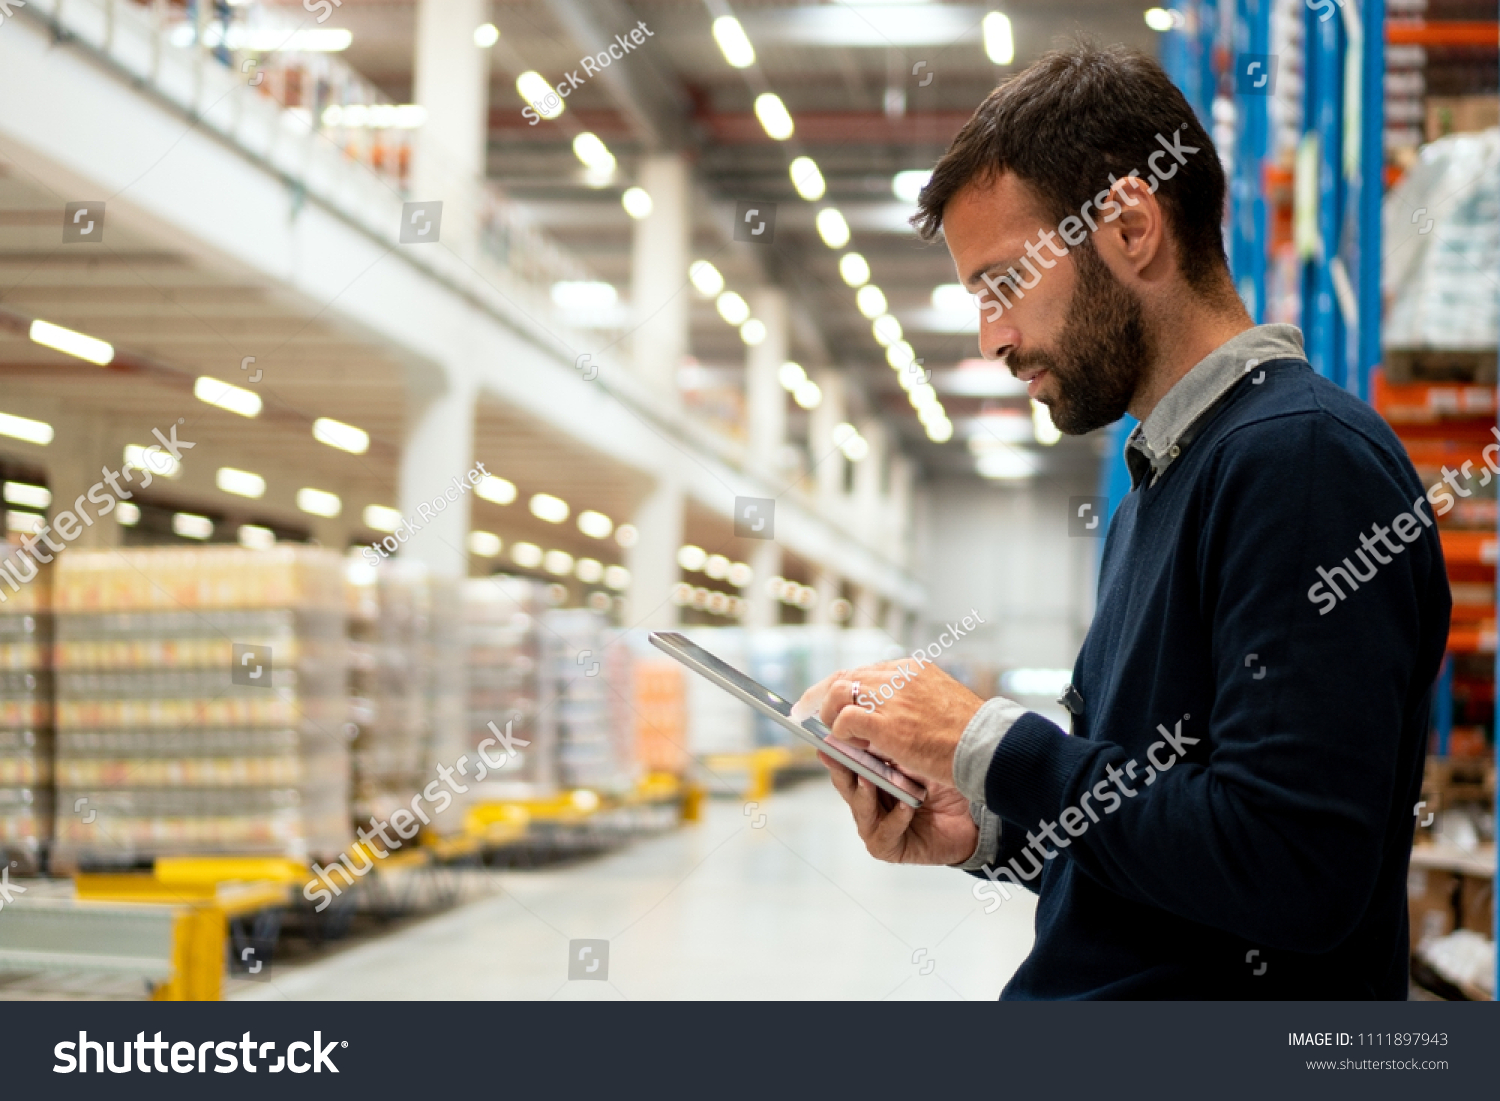 Manager holding digital tablet in warehouse #1111897943